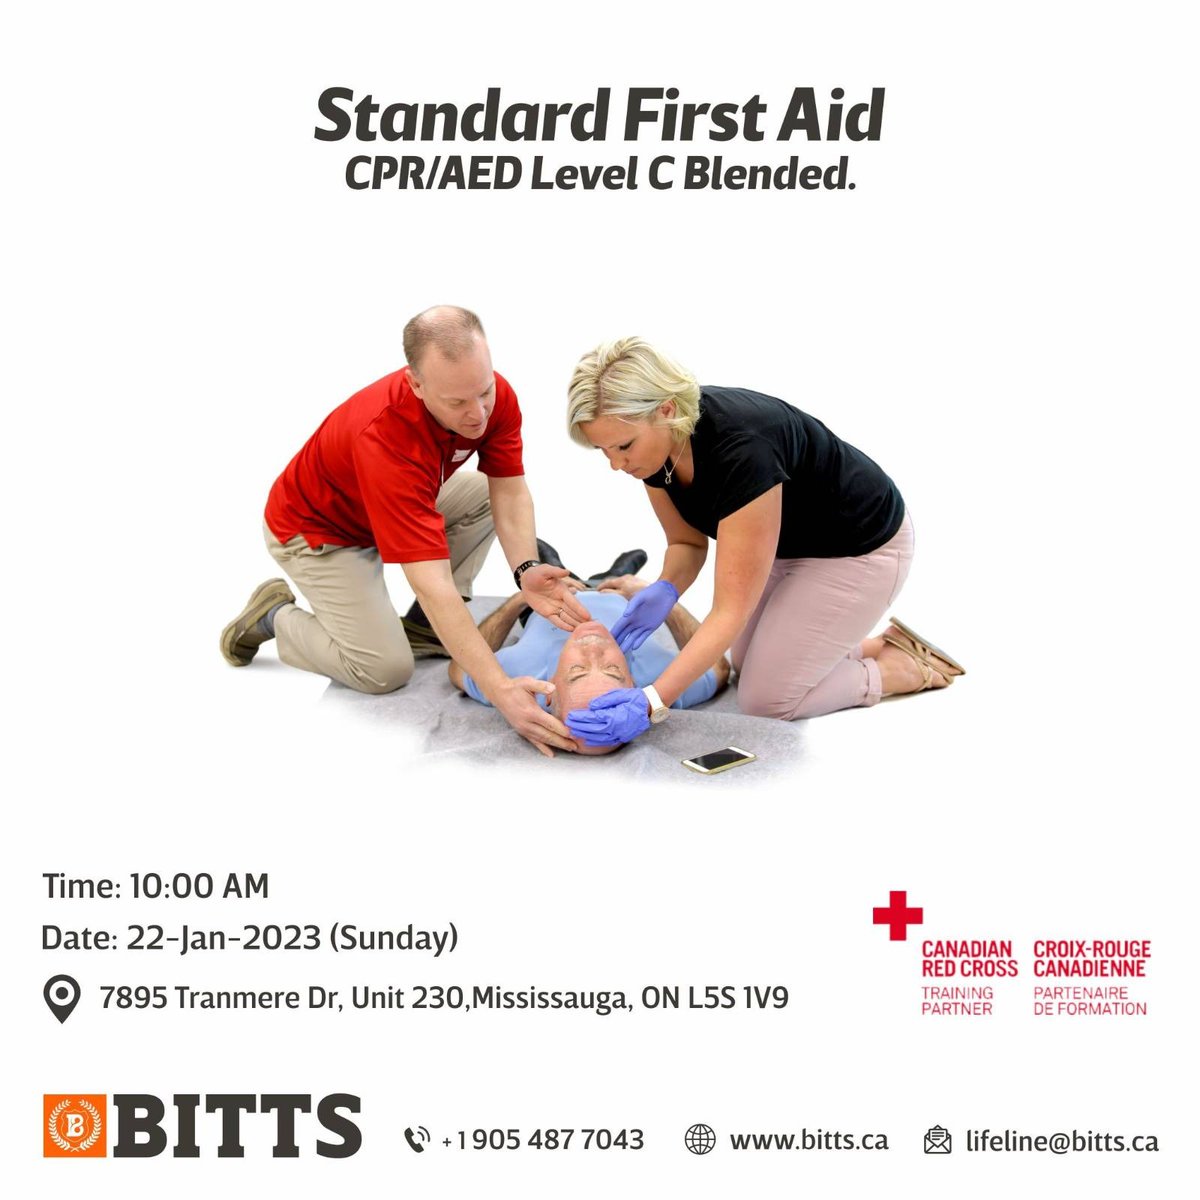 Few Slots Left! 
BITTS Certifications is conducting a #StandardFirstAid Blended session following Sunday.  Book now: bitts.ca/red-cross-cert…
Date: 22-Jan-2023 (Sunday) 
Time: 10:00 AM 
Location: 7895 Tranmere Dr, Unit 230, Mississauga, ON L5S 1V9